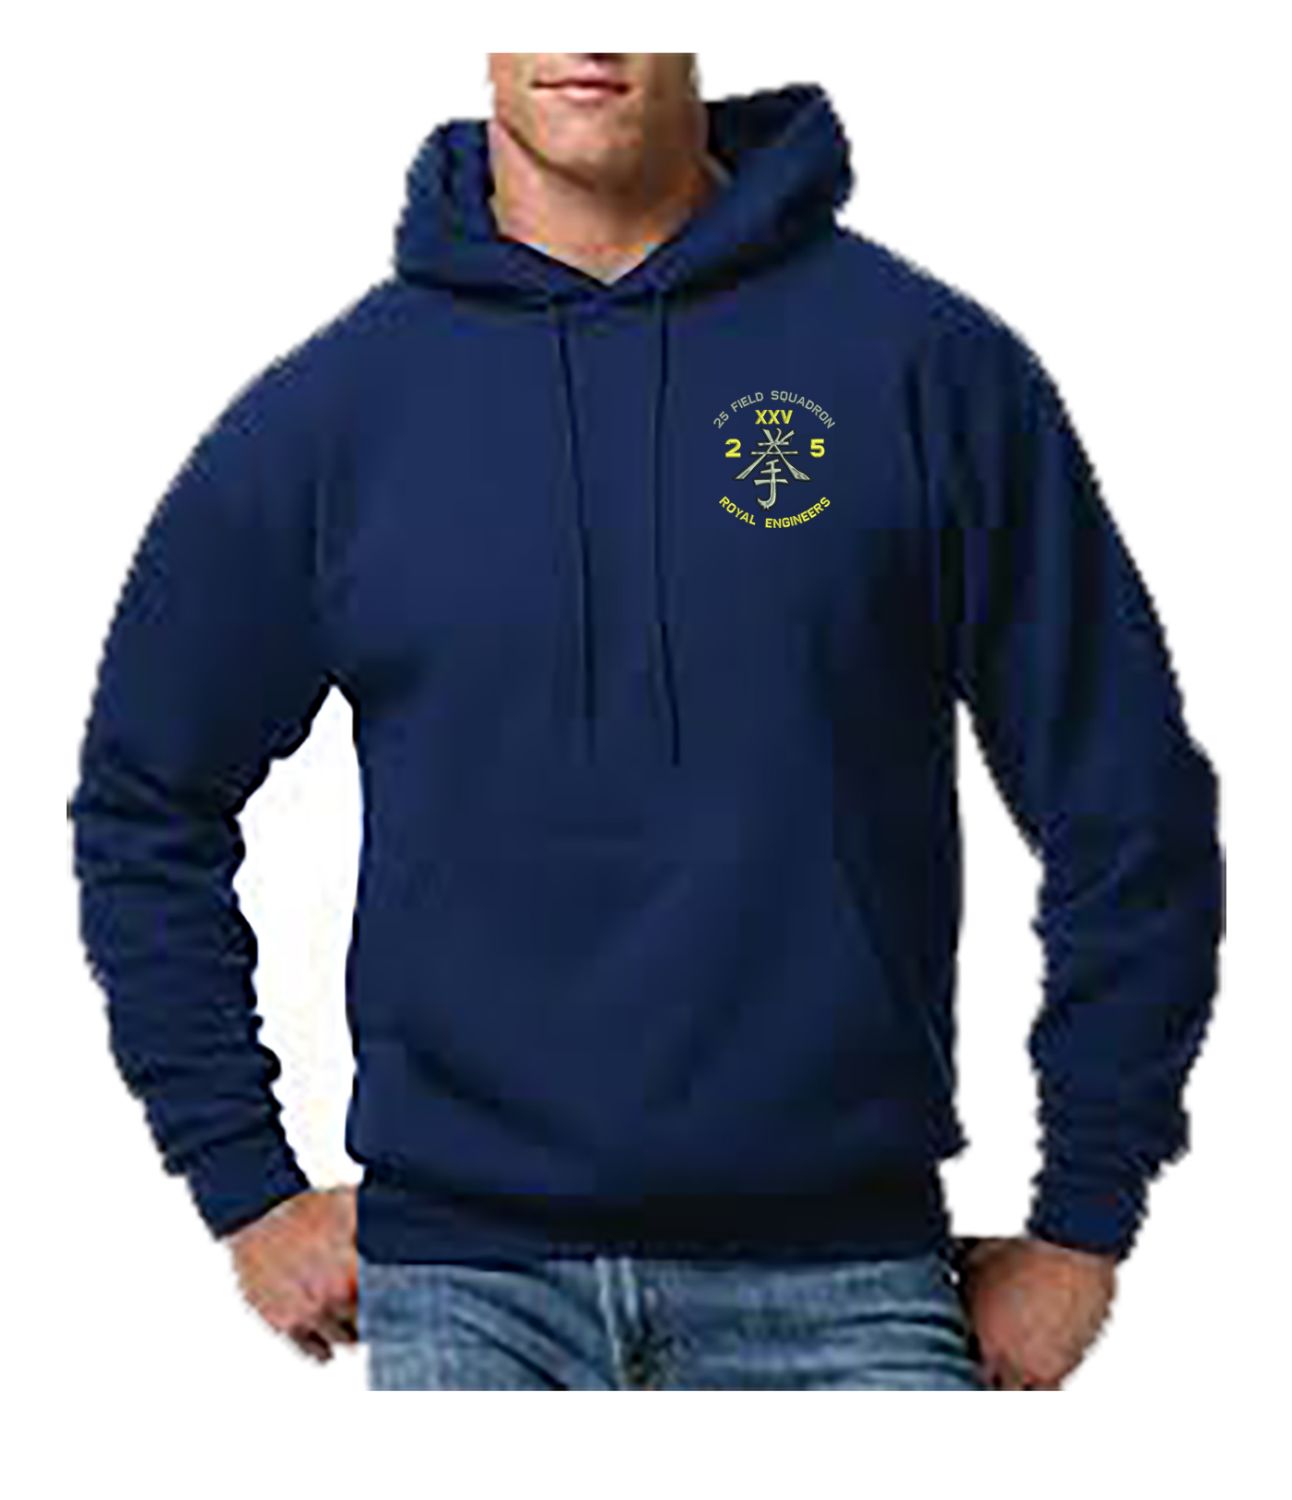 25 Fld Sqn Embroidered Hoodie SMALL BK